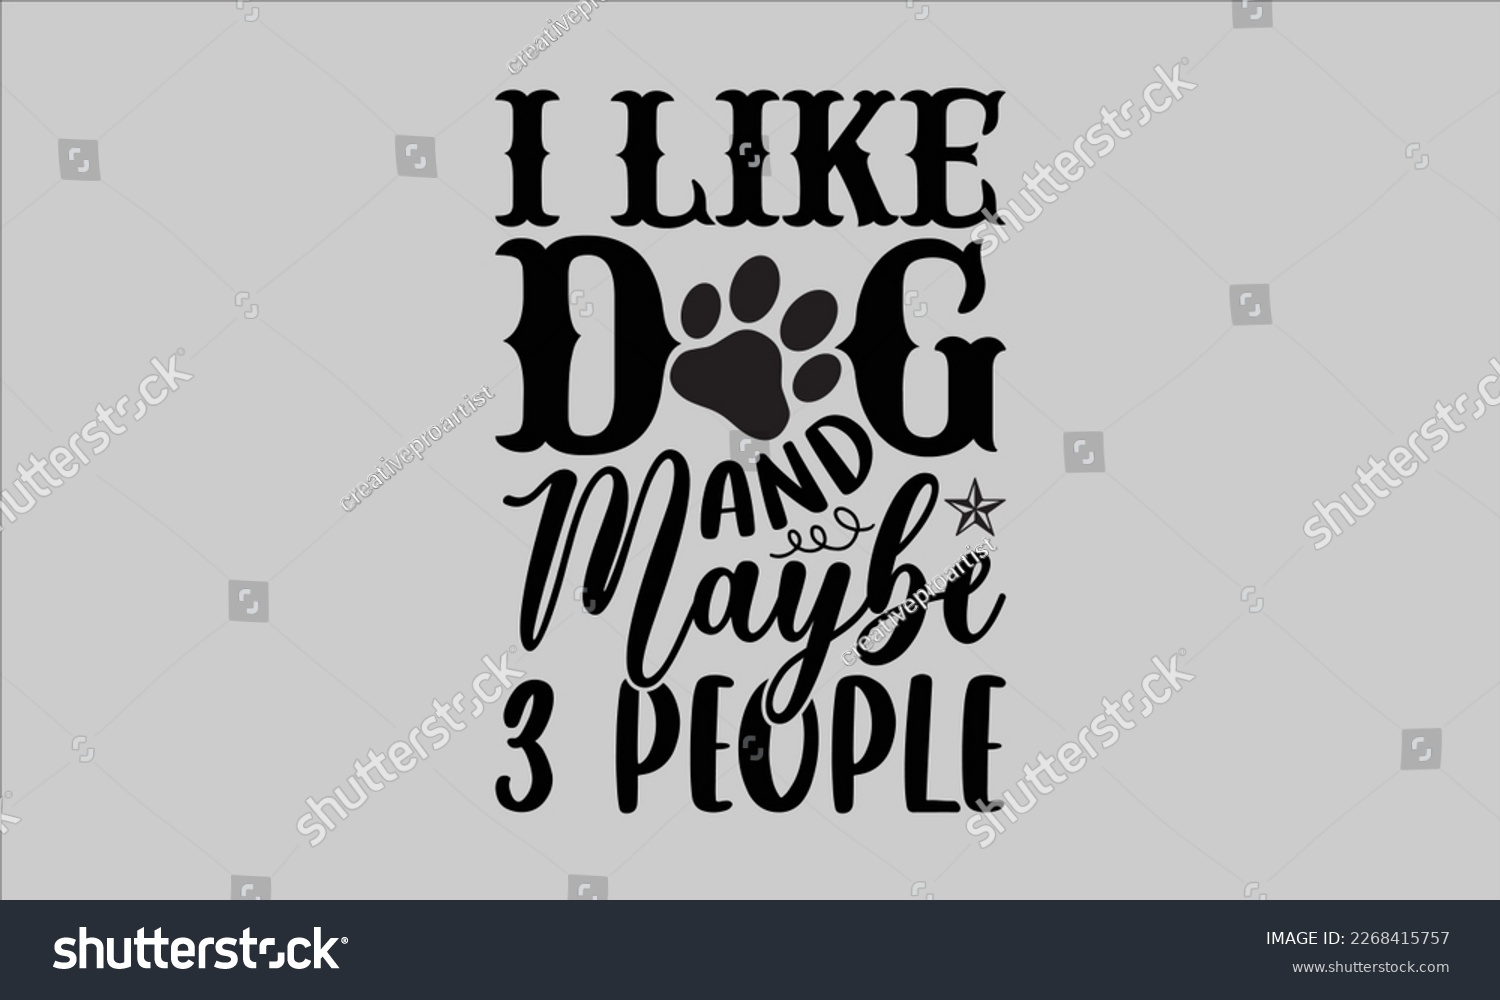 SVG of I like dog and maybe 3 people- Piano t- shirt design, Template Vector and Sports illustration, lettering on a white background for svg Cutting Machine, posters mog, bags eps 10. svg